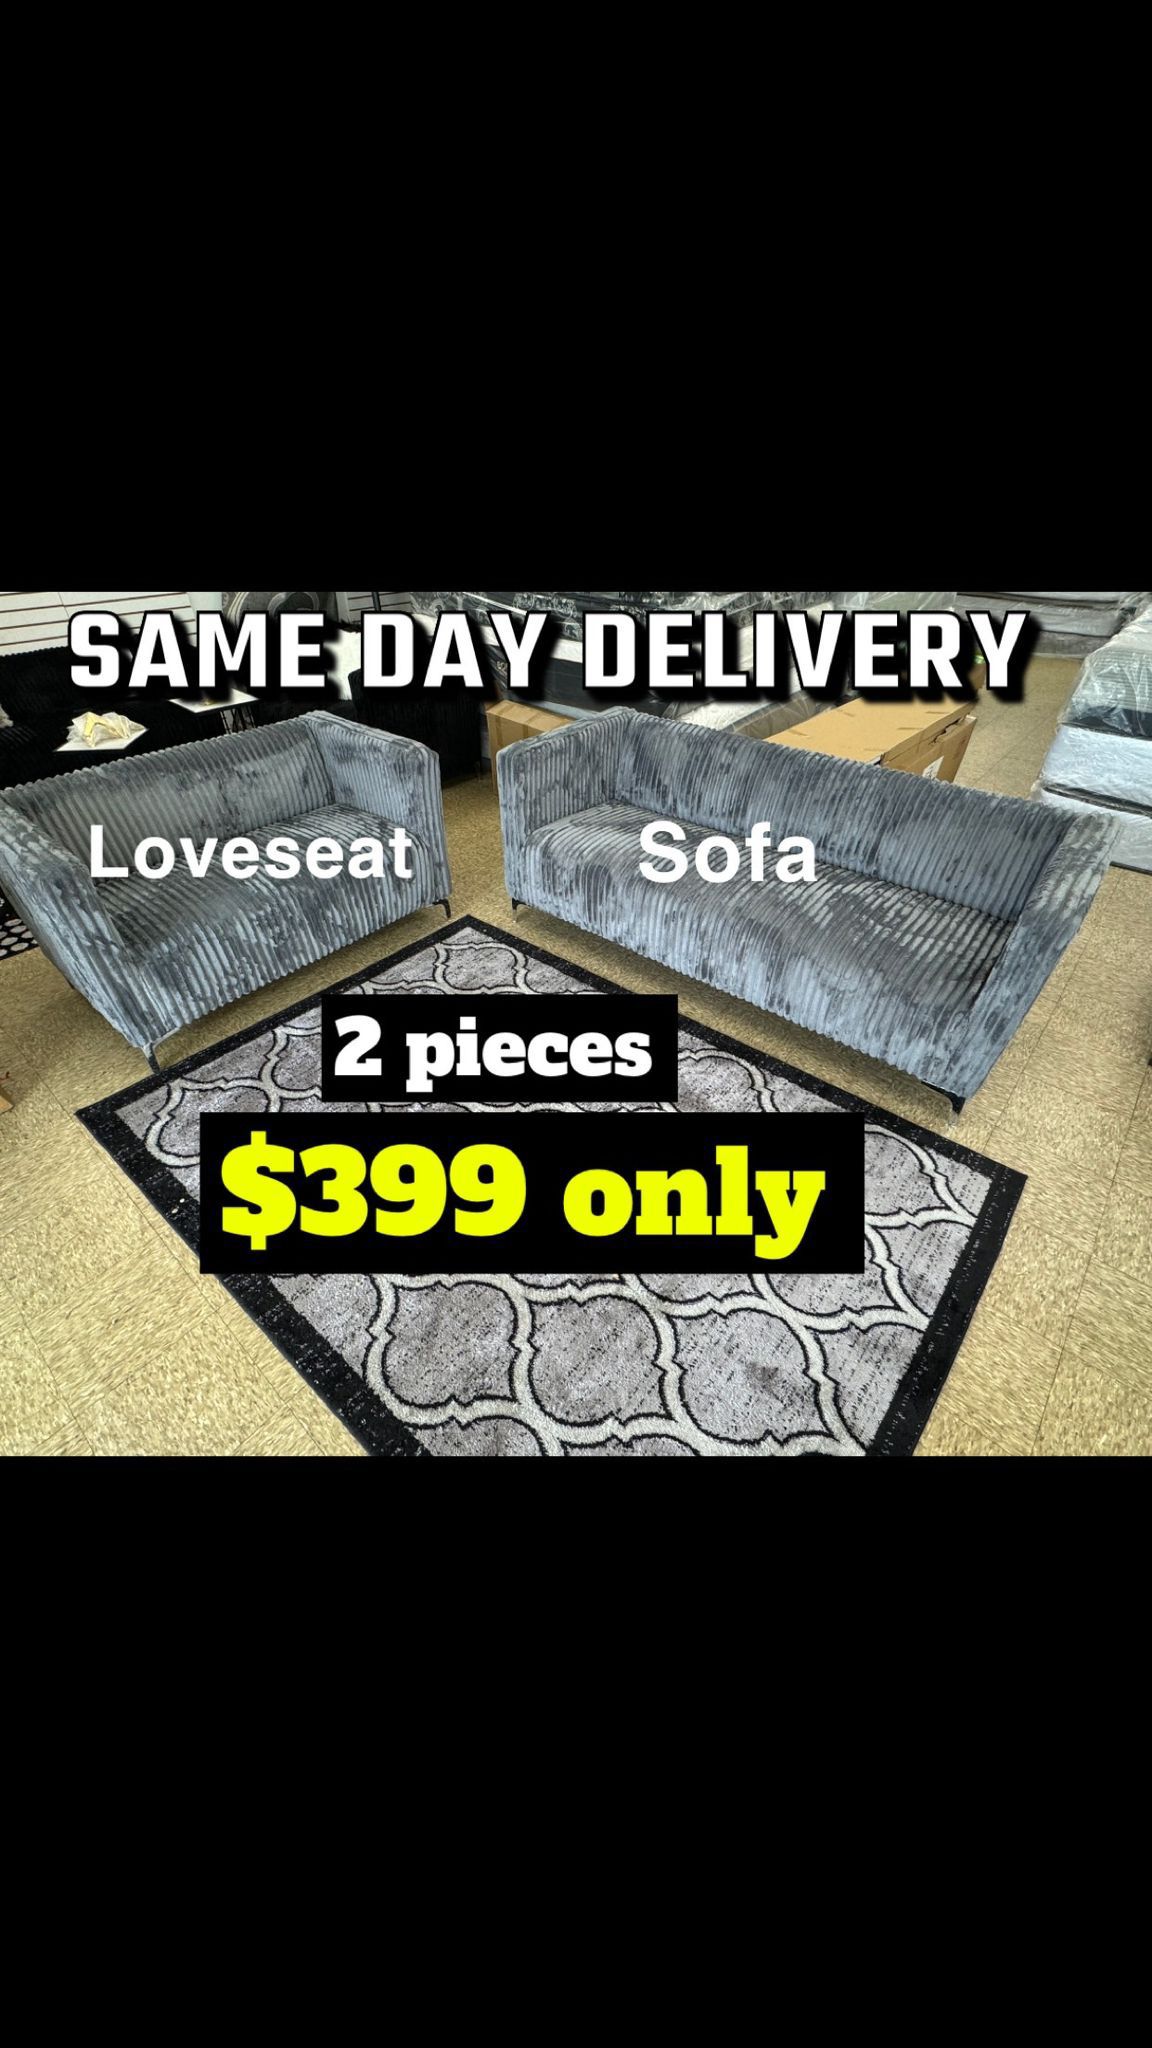 Sofá & loveseat brand new available for pick up or delivery $399 for both pieces